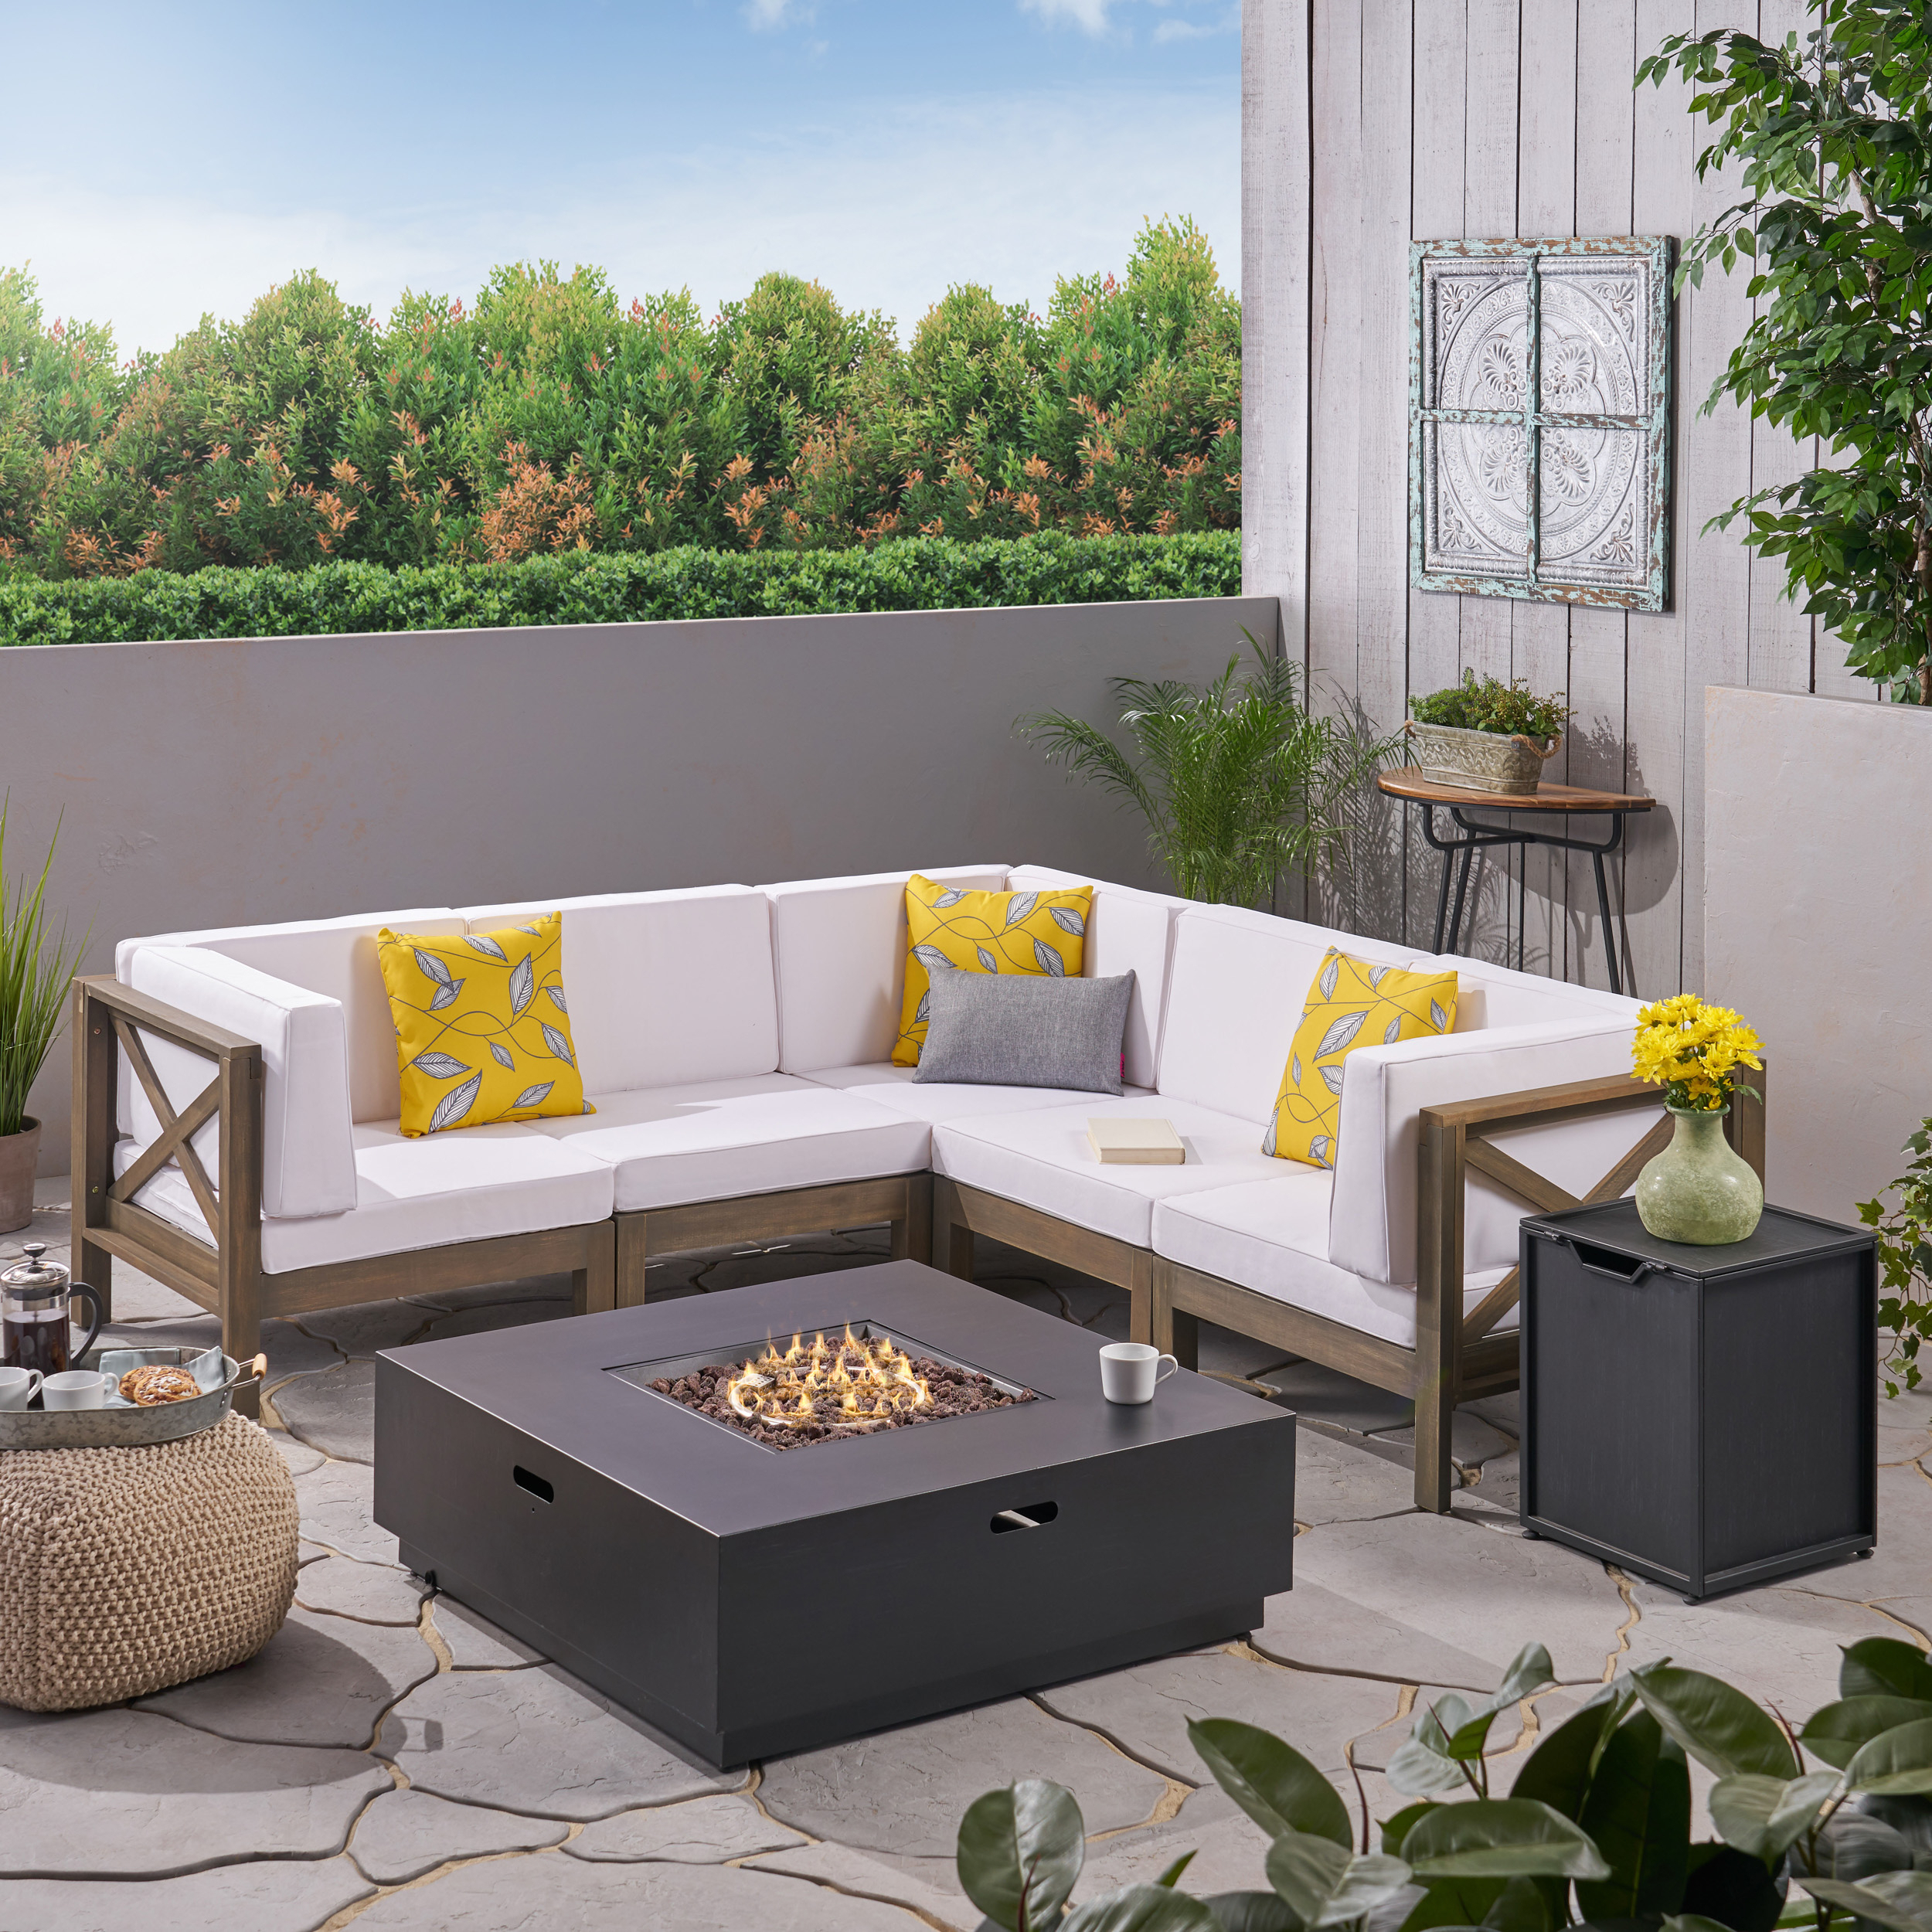 Gina Outdoor Acacia Wood 5 Seater Sectional Sofa Set With Fire Pit - Gray/White/Dark Gray